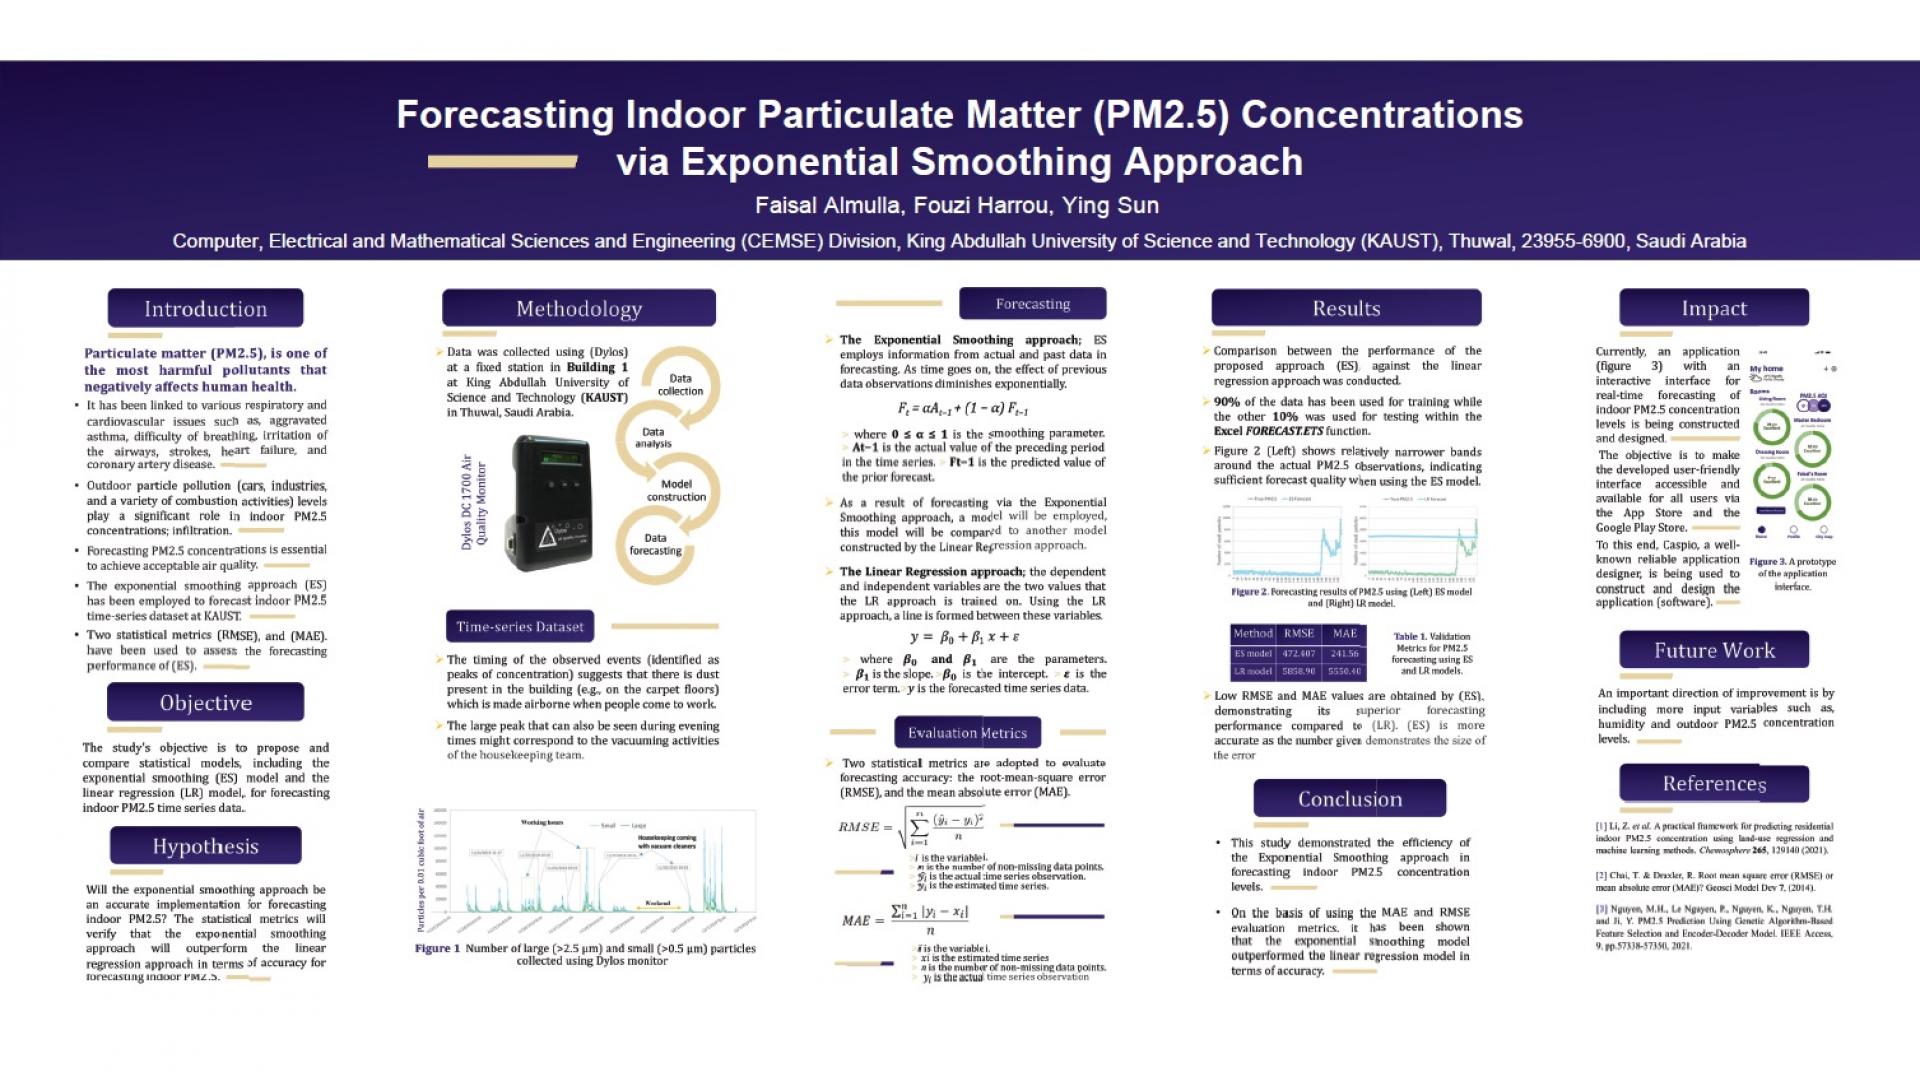 Faisal Almulla_Forecasting Indoor Particulate Matter (PM2.5) Concentrations via Exponential Smoothing Approach